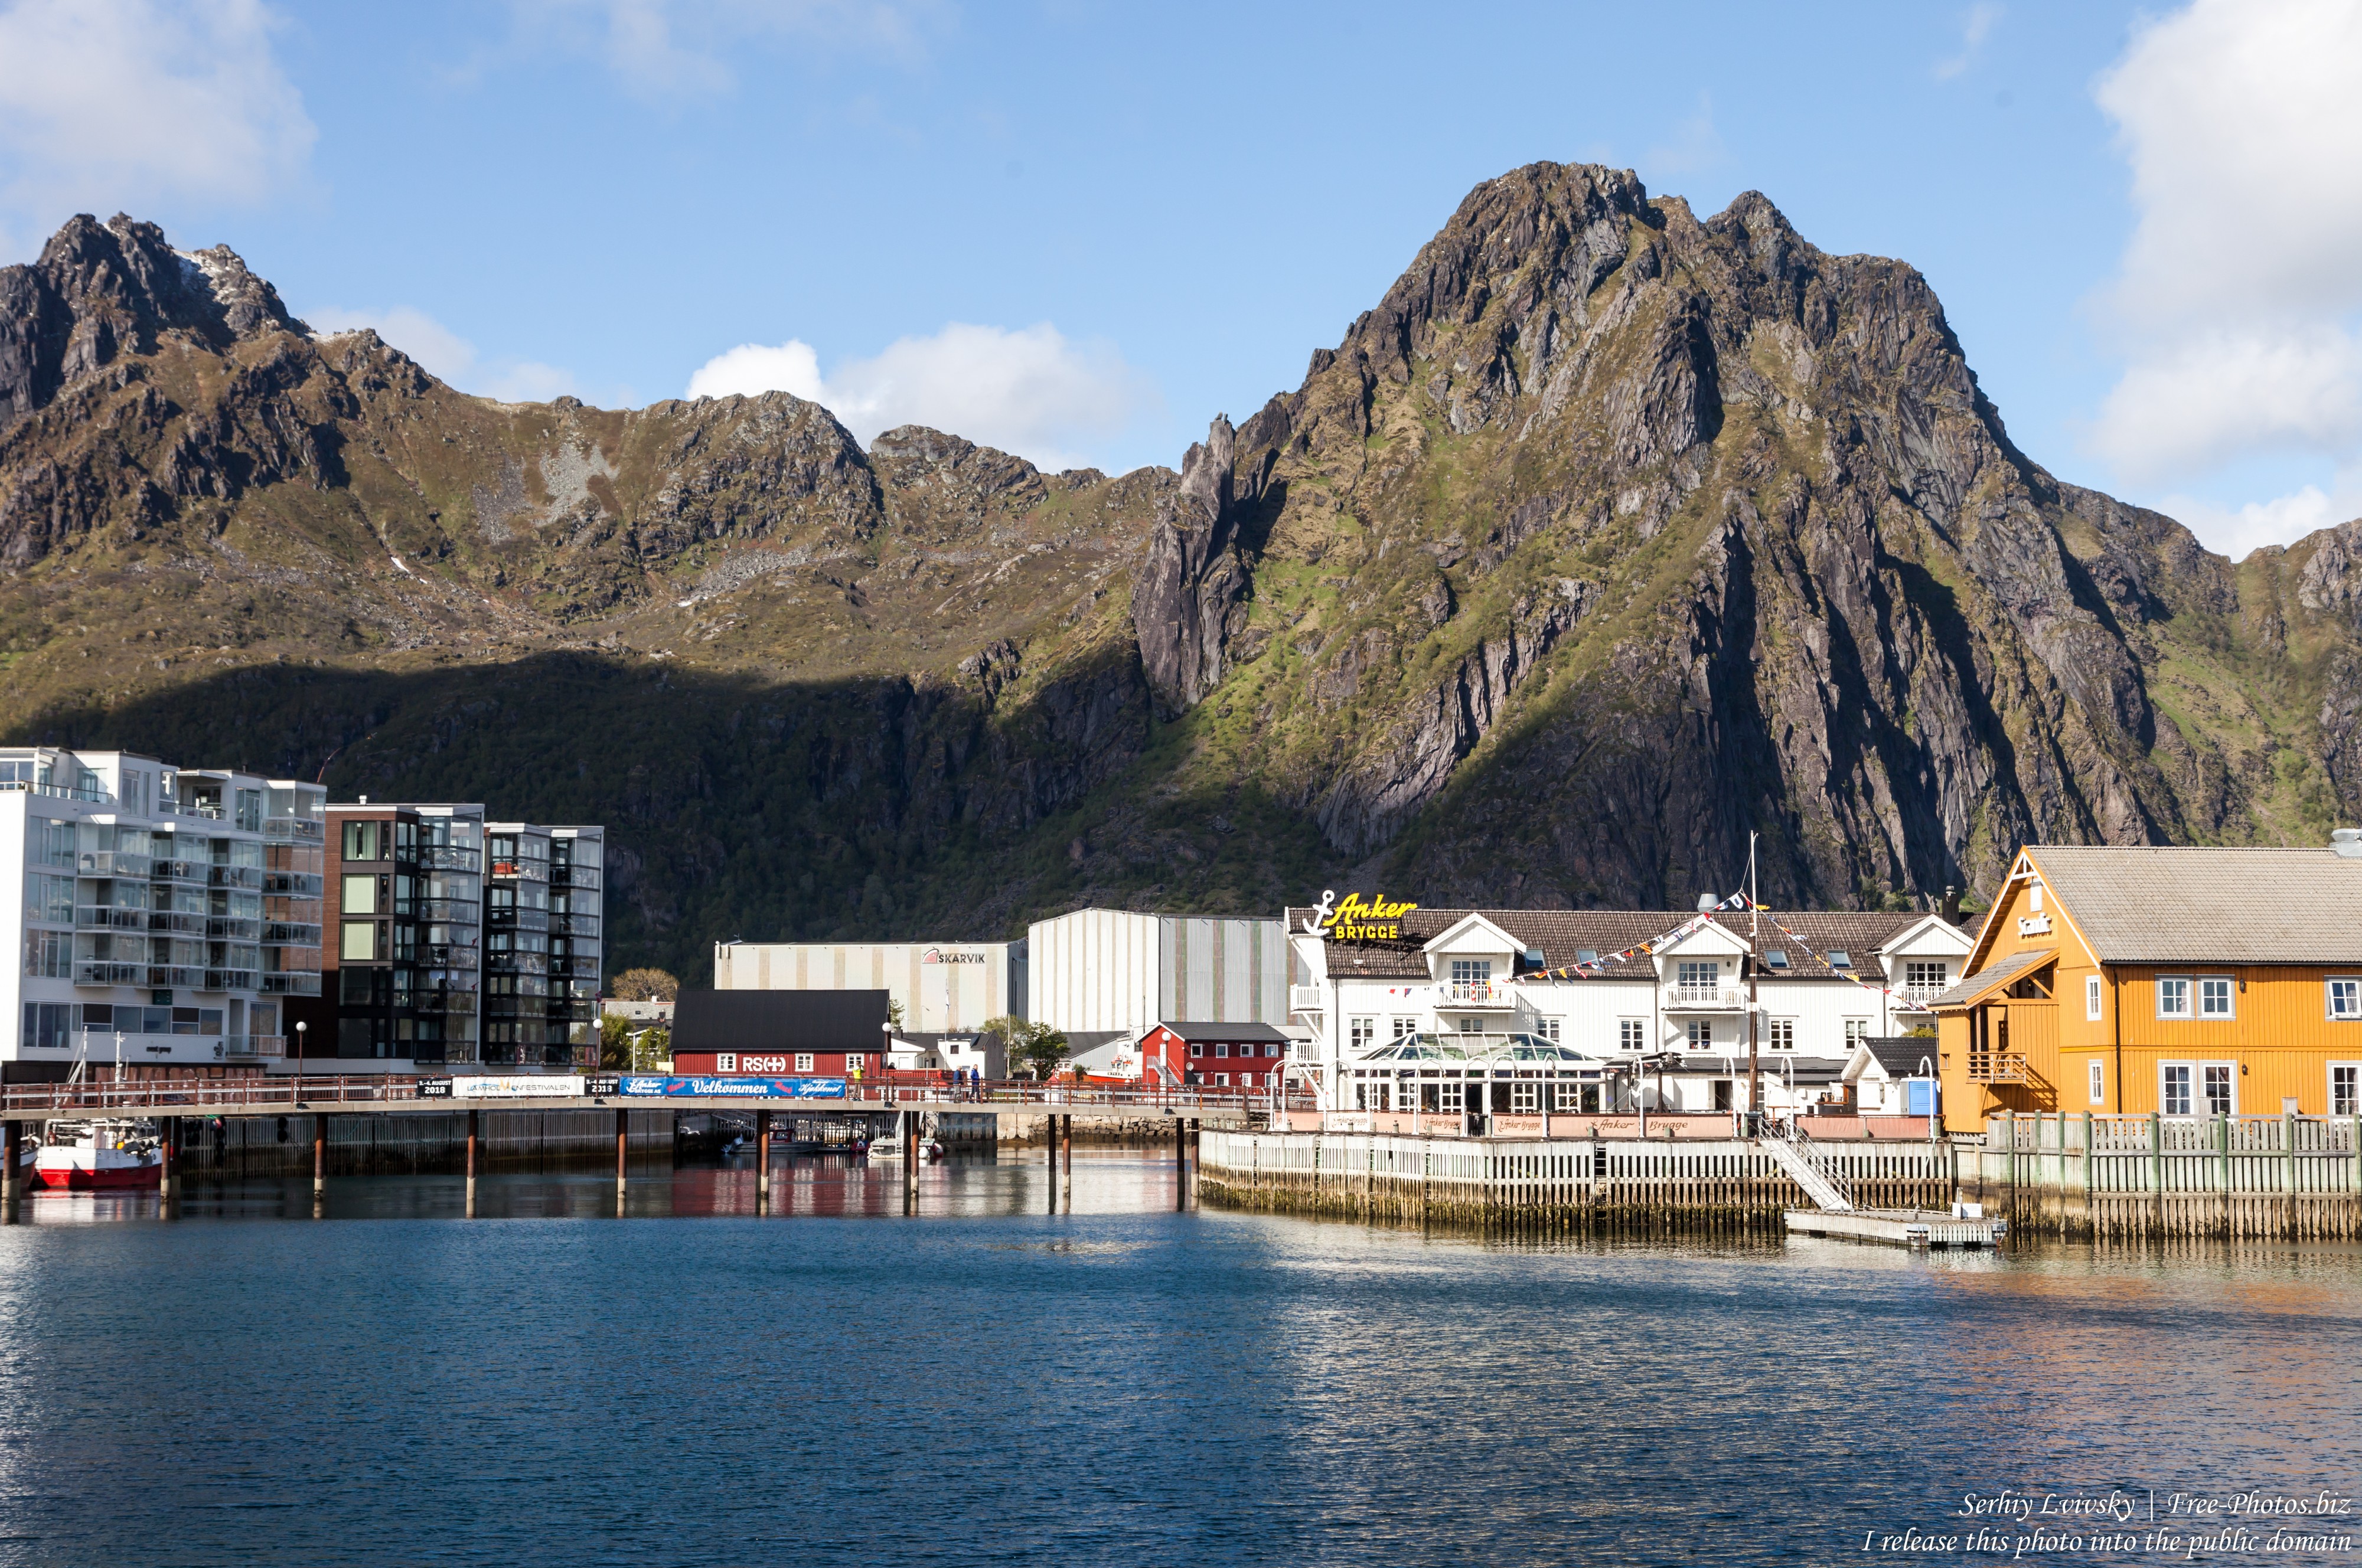 Svolvaer, Lofoten, Norway photographed in June 2018 by Serhiy Lvivsky, picture 5